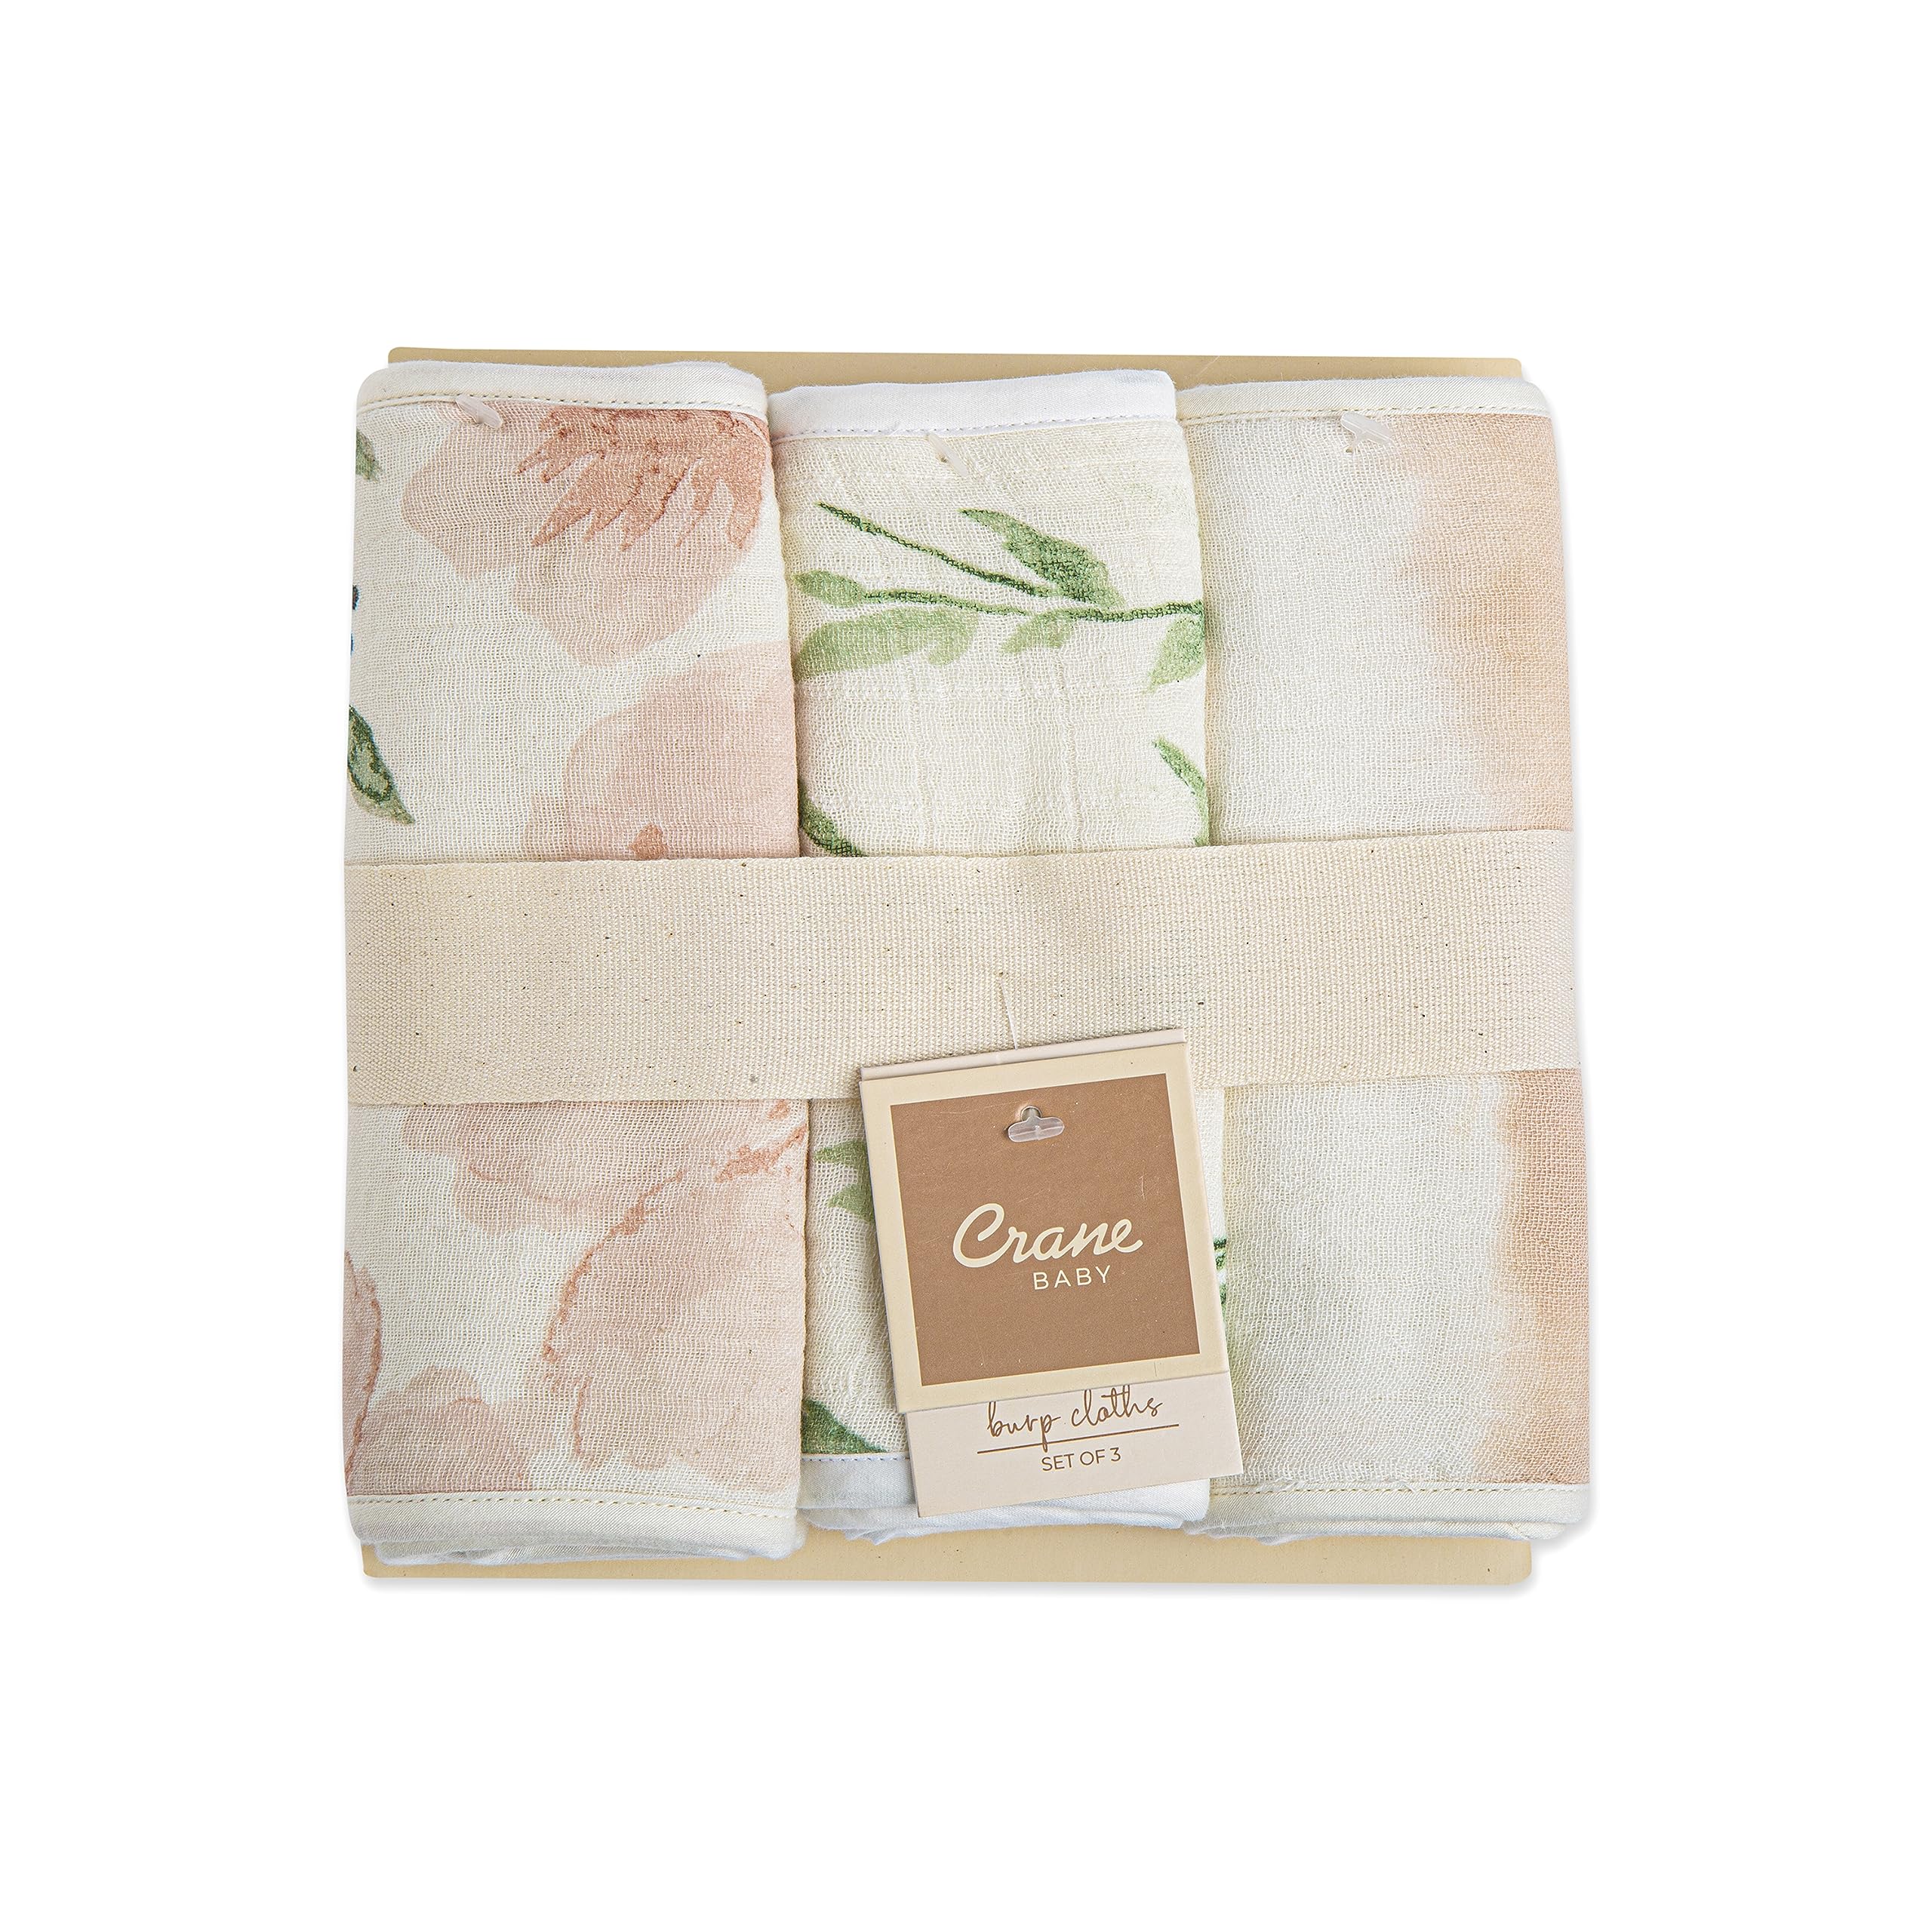 Crane Baby Soft Muslin Burp Cloth, Lightweight and Absorbent Burp Cloth for Boys and Girls, Floral, 3 Piece, 7” x 20”